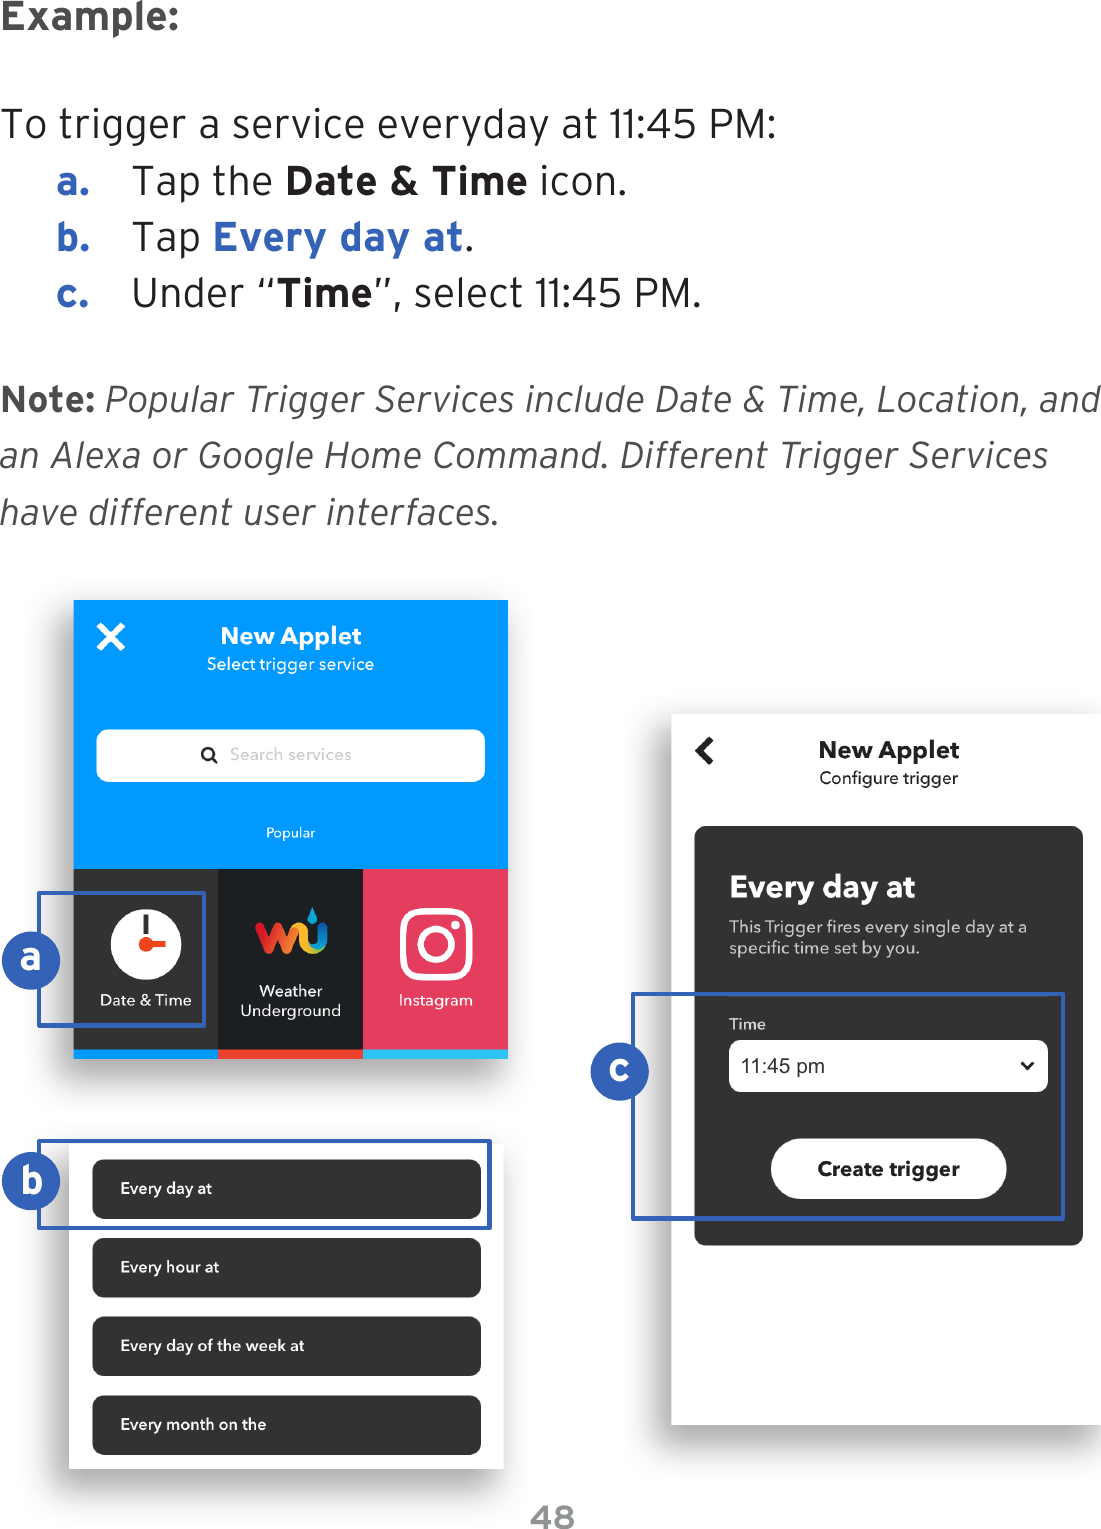 48To trigger a service everyday at 11:45 PM:a.  Tap the Date &amp; Time icon.b.  Tap Every day at.c.  Under “Time”, select 11:45 PM.Example:Note: Popular Trigger Services include Date &amp; Time, Location, and an Alexa or Google Home Command. Different Trigger Services have different user interfaces.11:45 pmacb